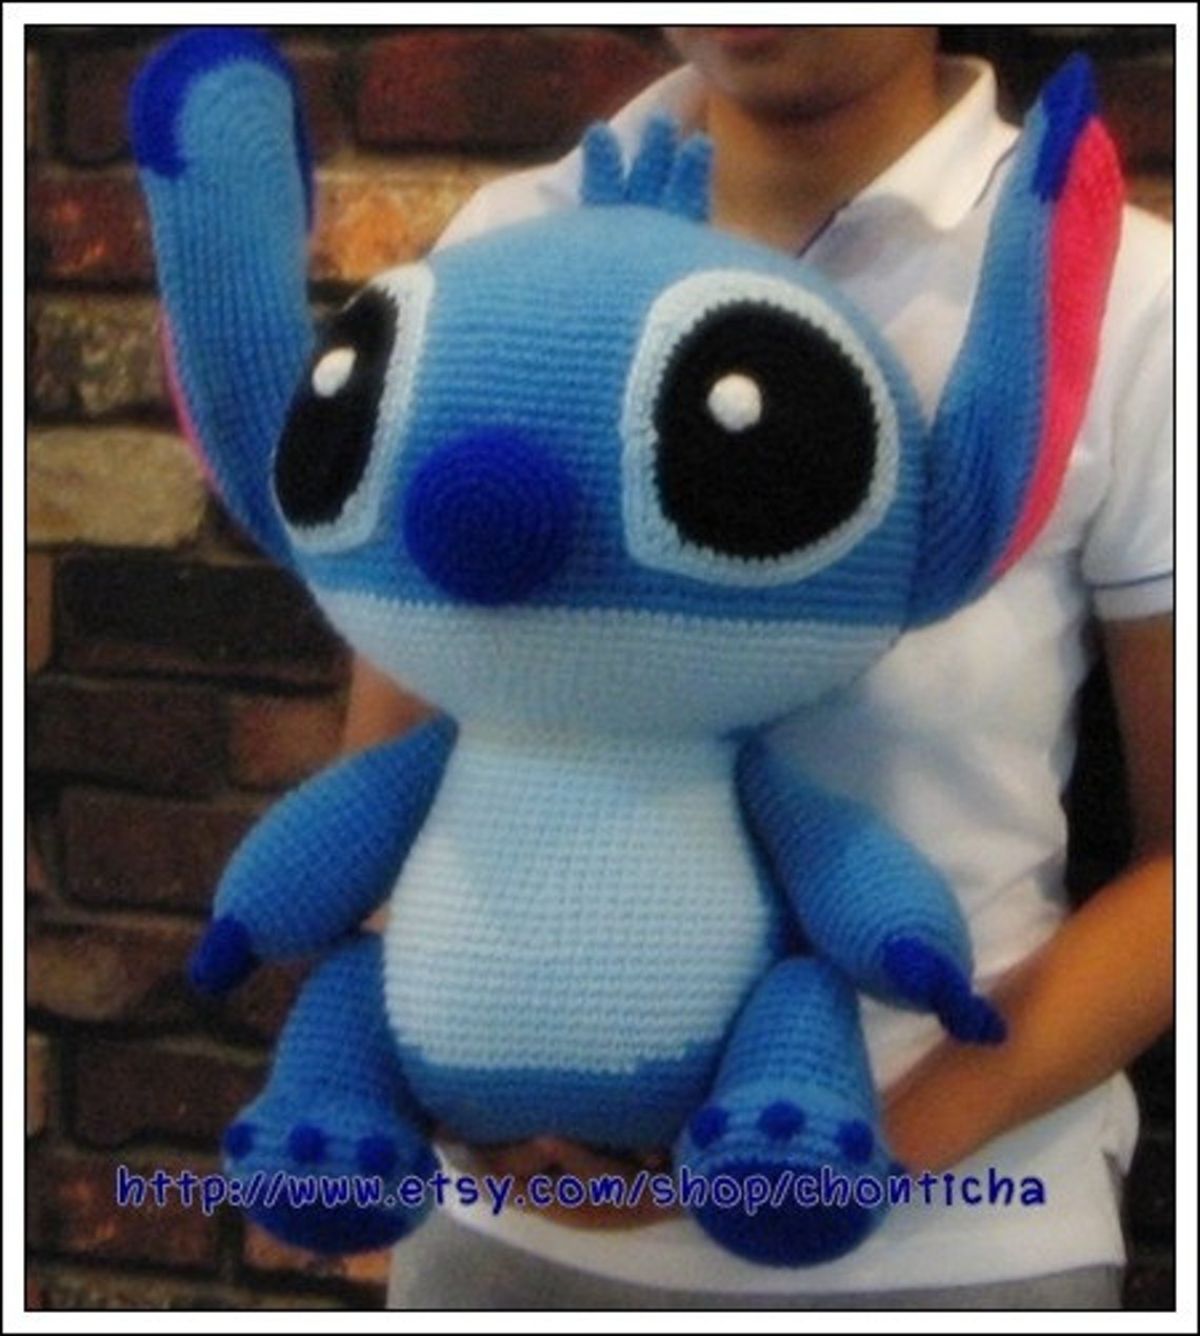 Large crochet stuffed Stitch toy with large black eyes being held by someone with their face out of the shot.